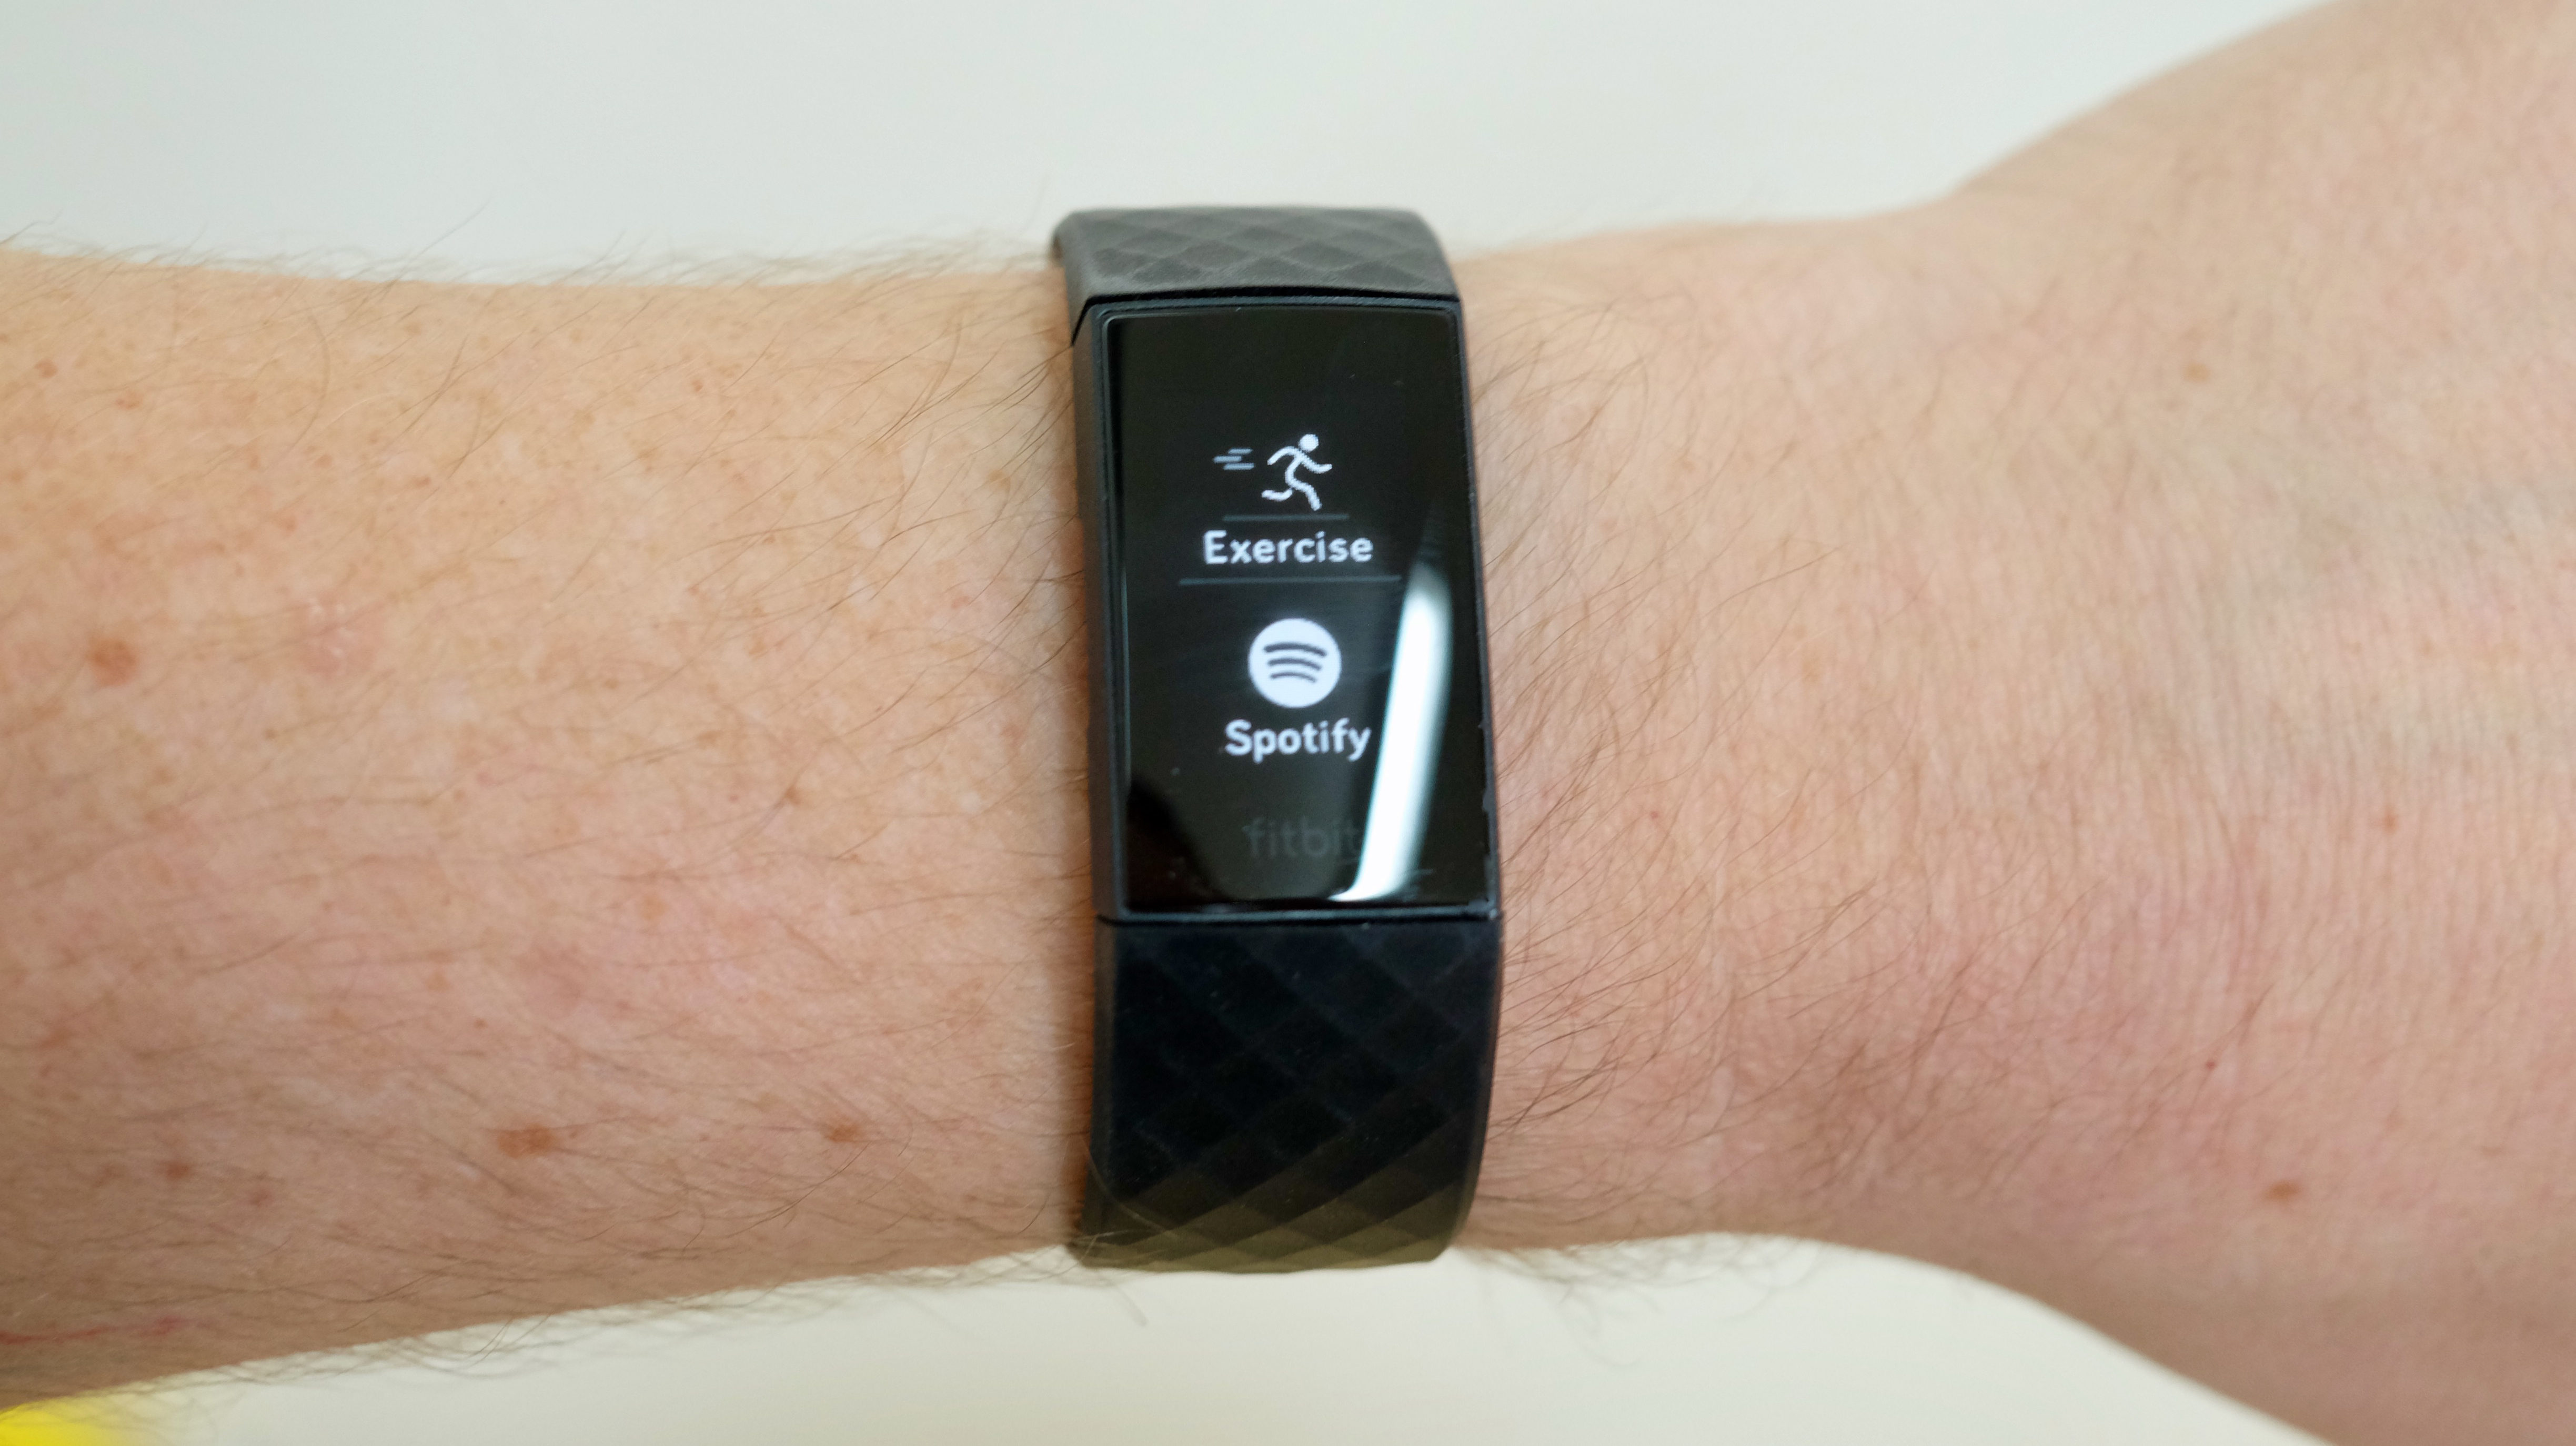 fitbit charge 4 dnd sleep